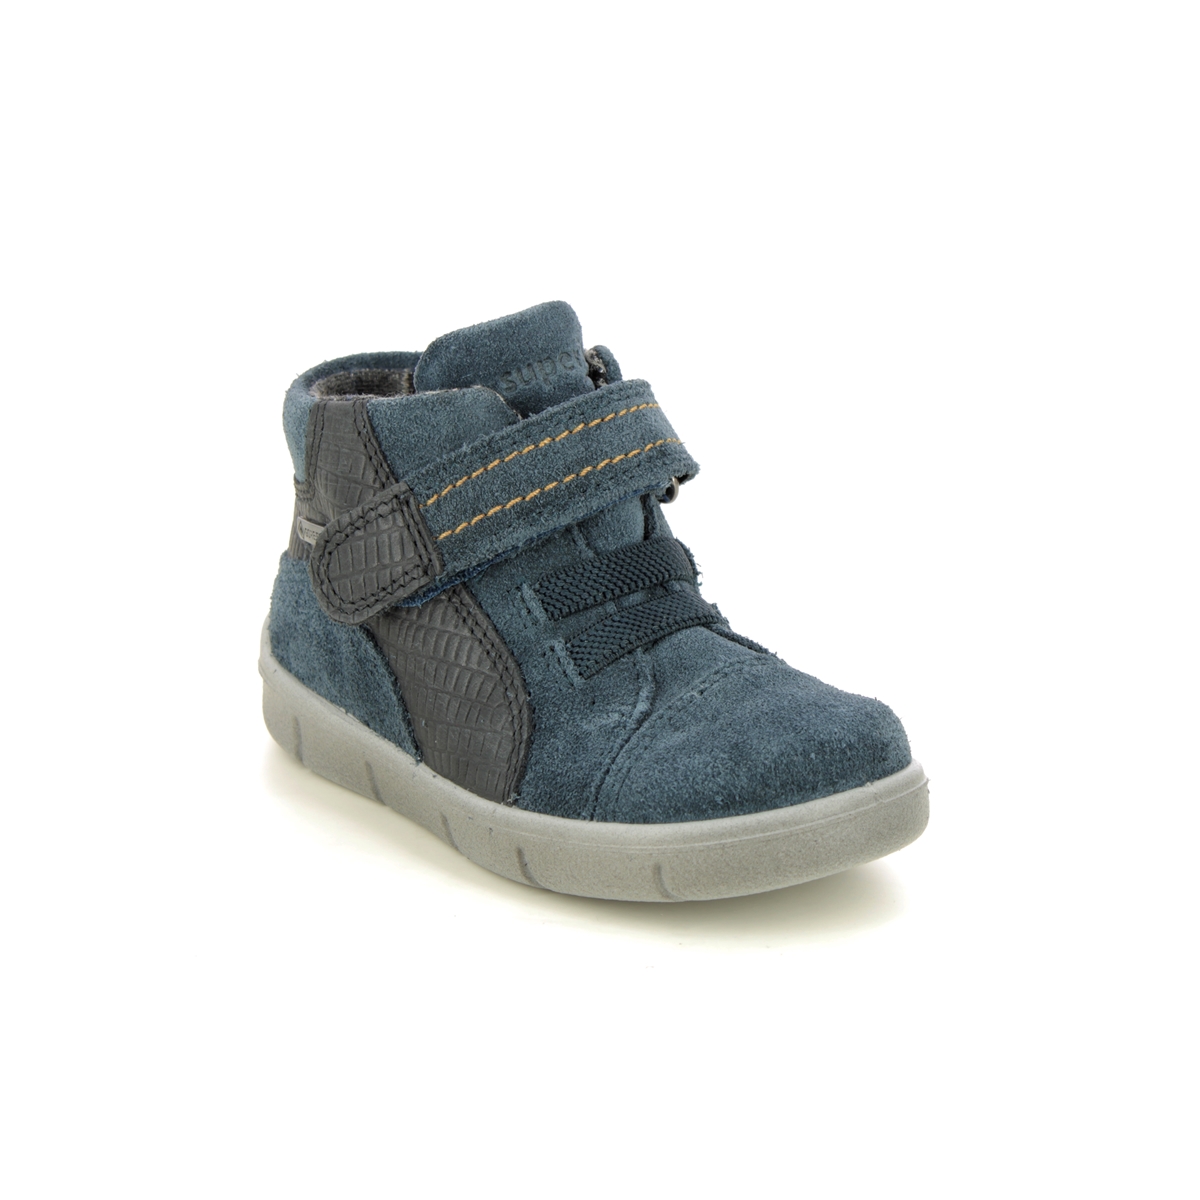 Superfit Ulli Bungee Gtx Blue Suede Kids Toddler Boys Boots 1009429-8000 in a Plain Leather in Size 28